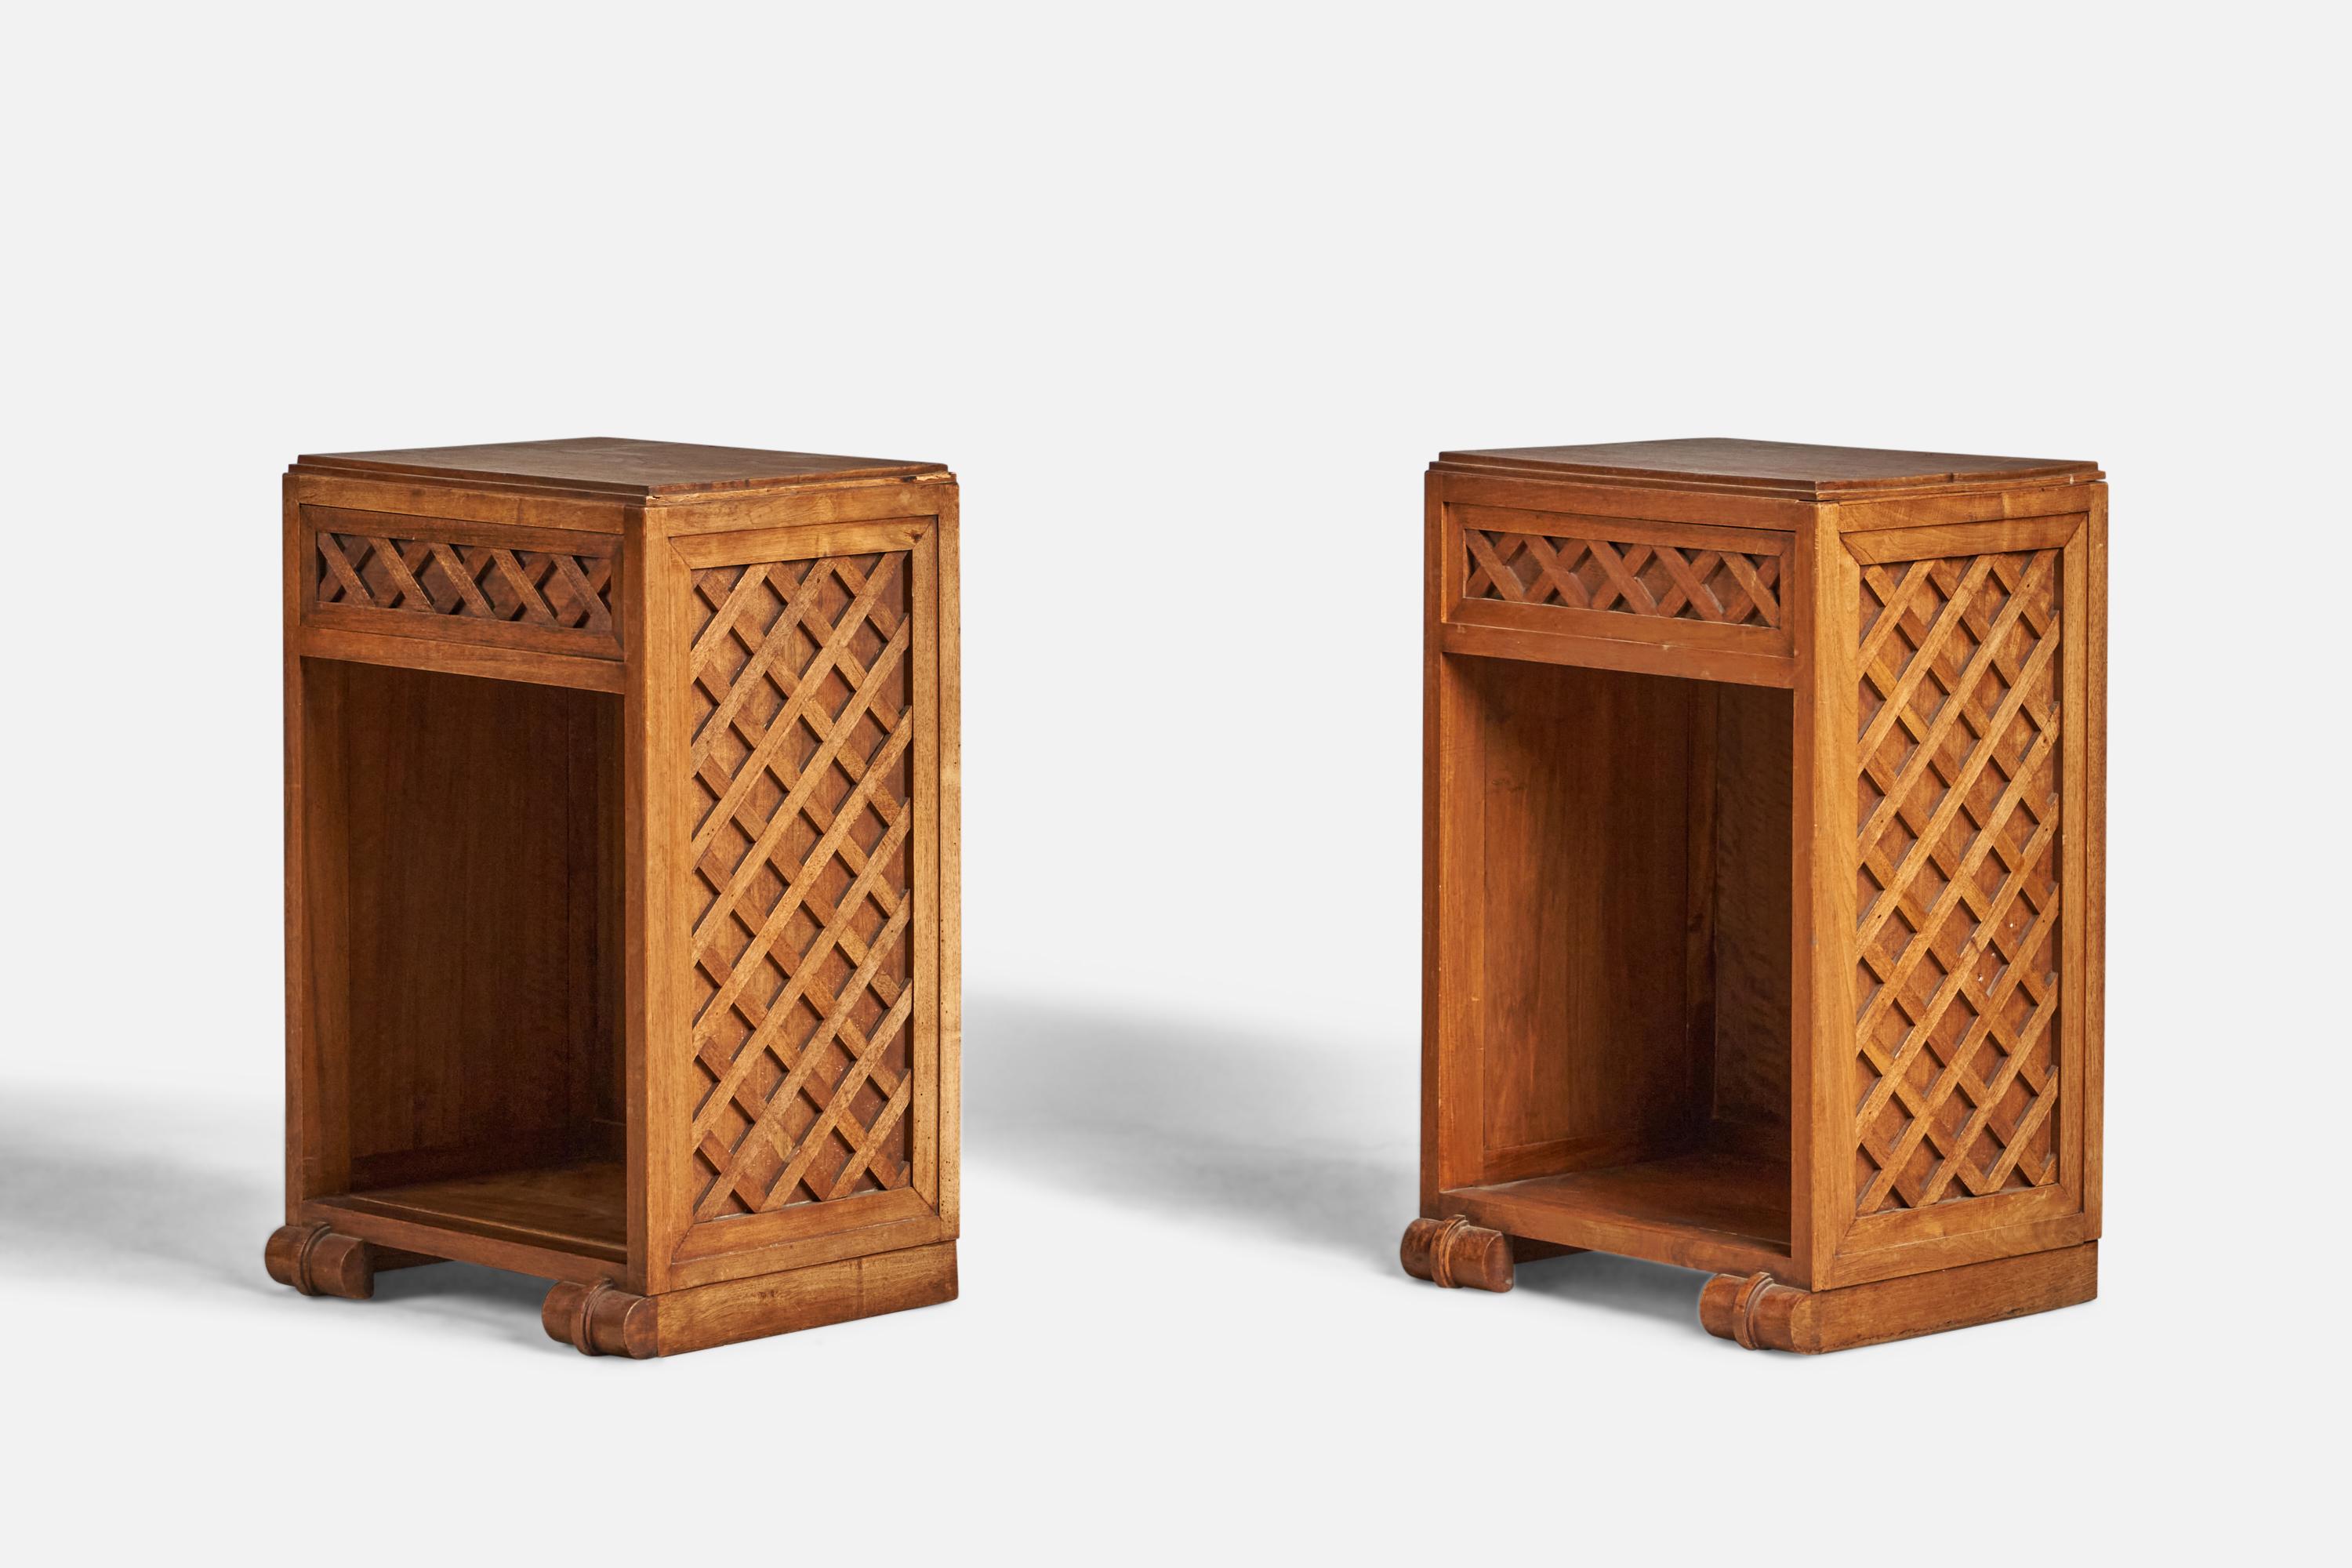 A pair of solid oak nightstands or bedside cabinets, designed and produced in France, c. 1940s.